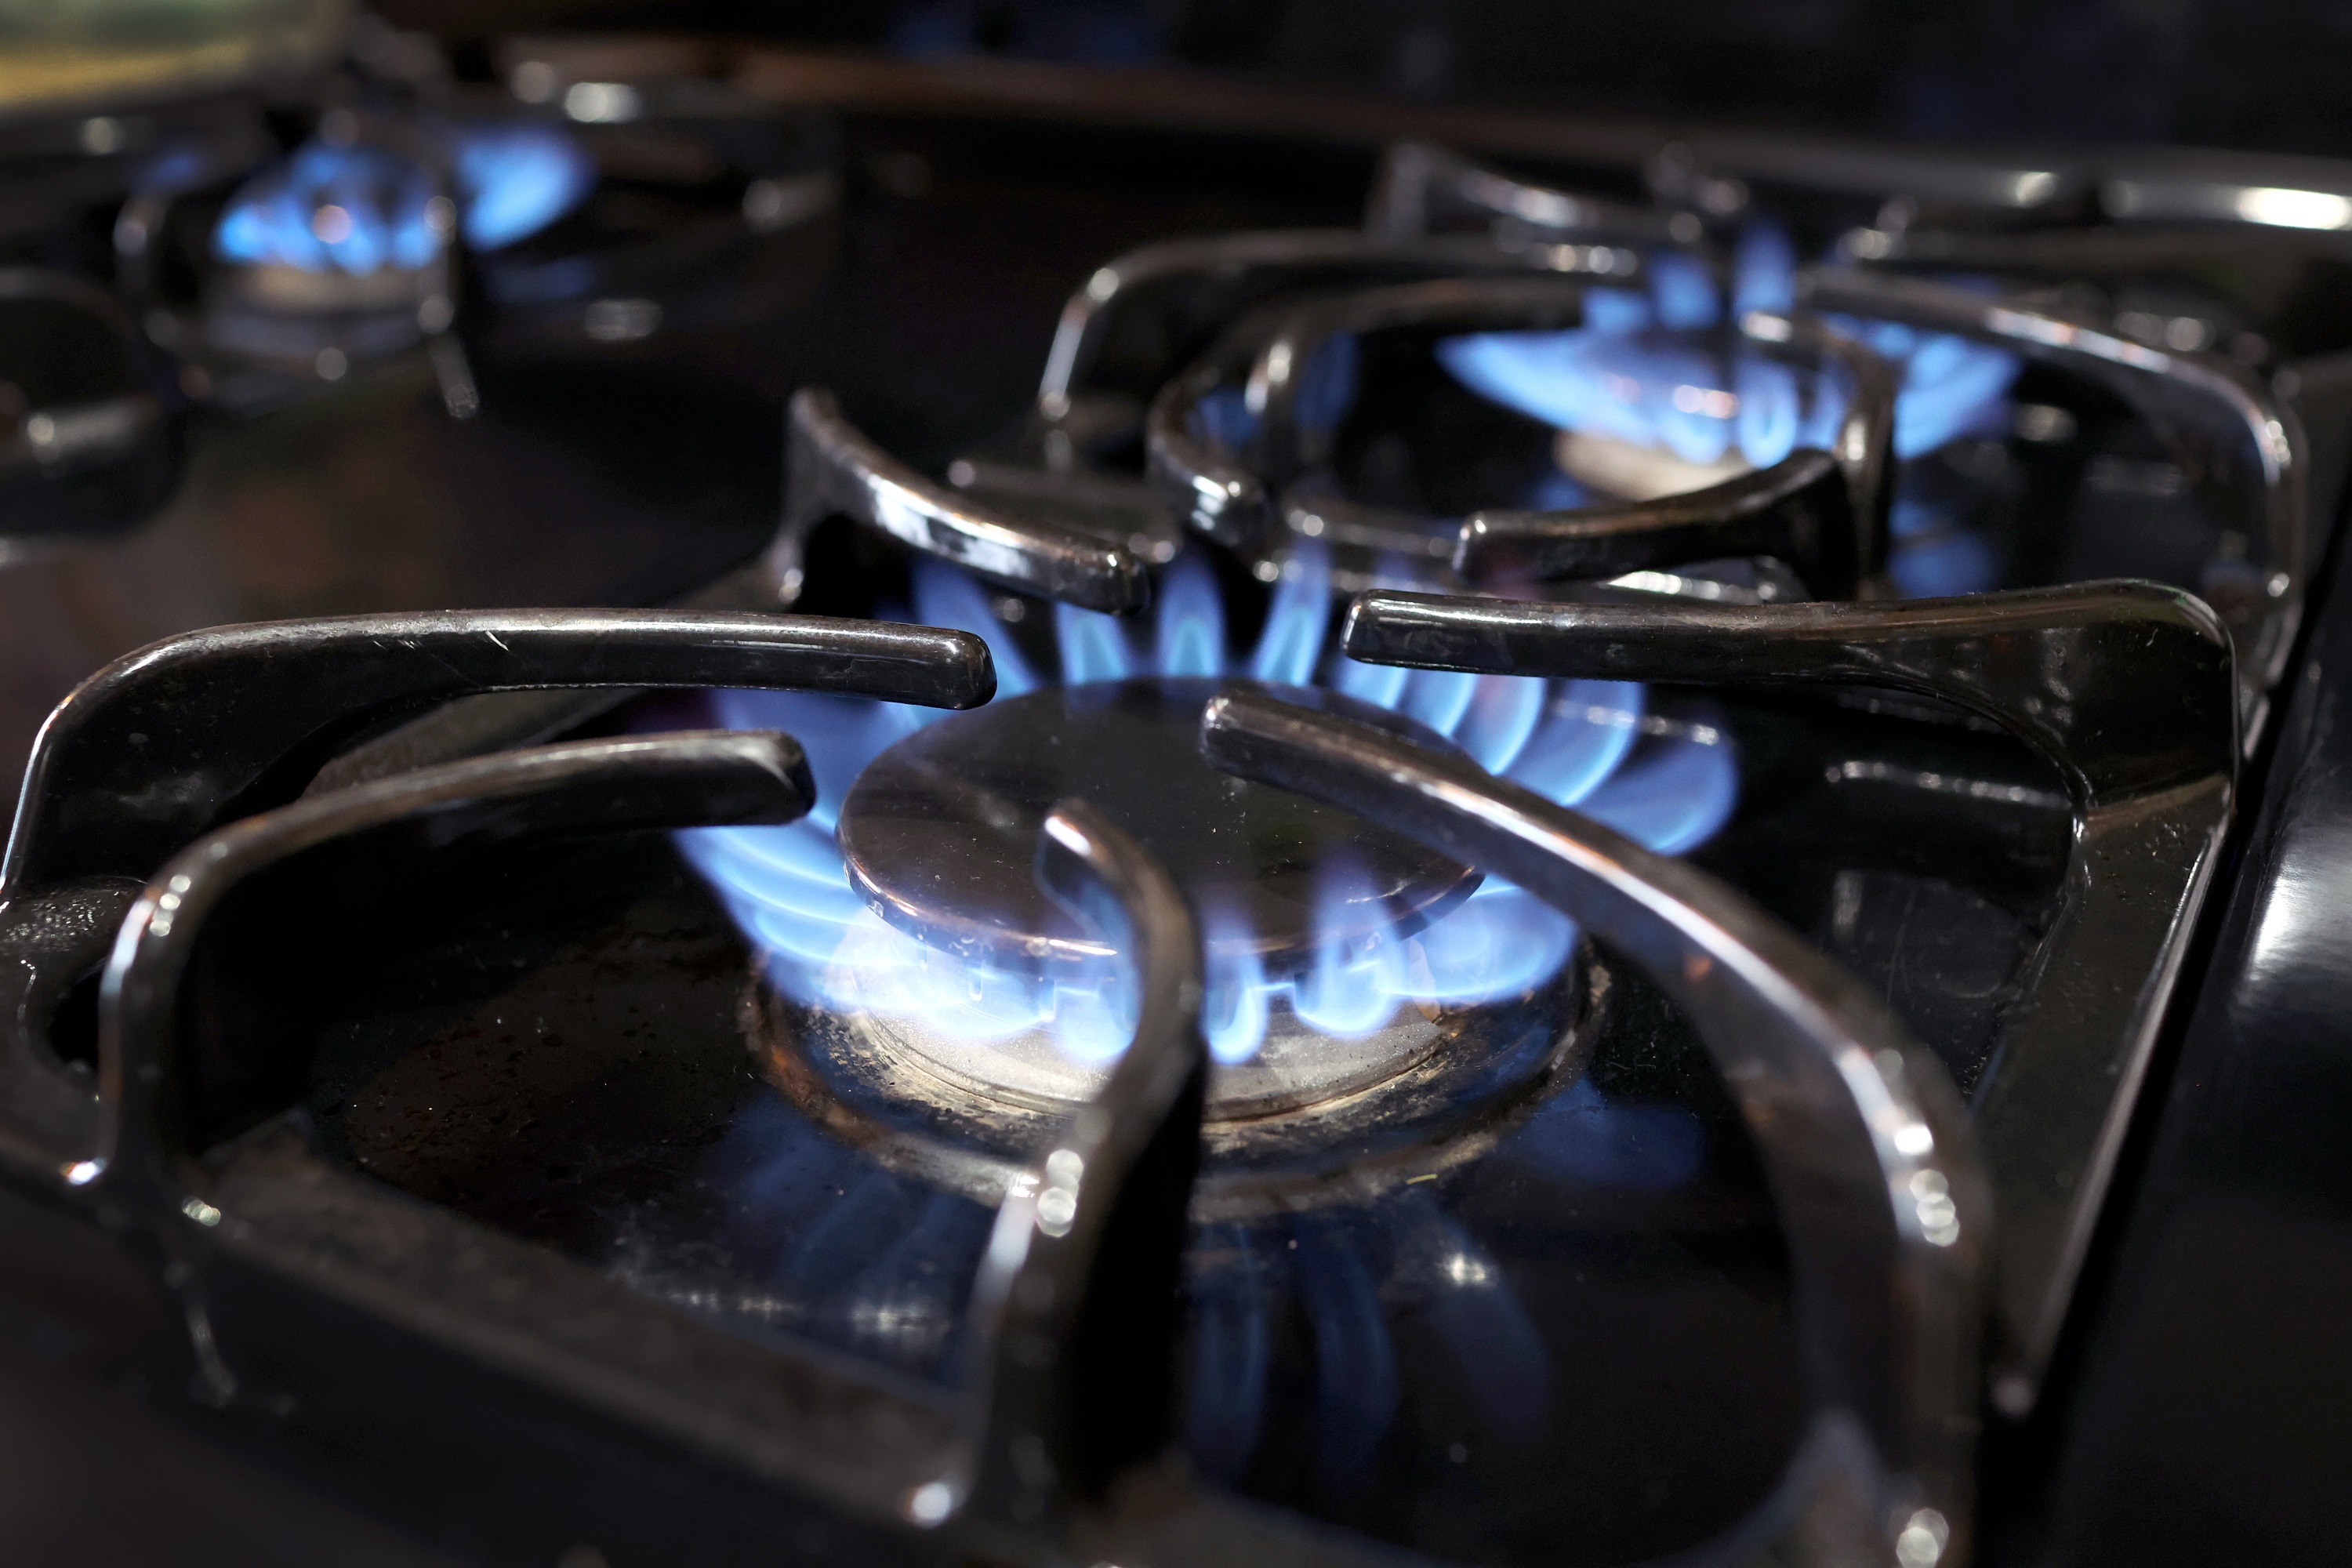 https://img.theepochtimes.com/assets/uploads/2023/02/28/gas-stove-GettyImages-1456022783.jpg